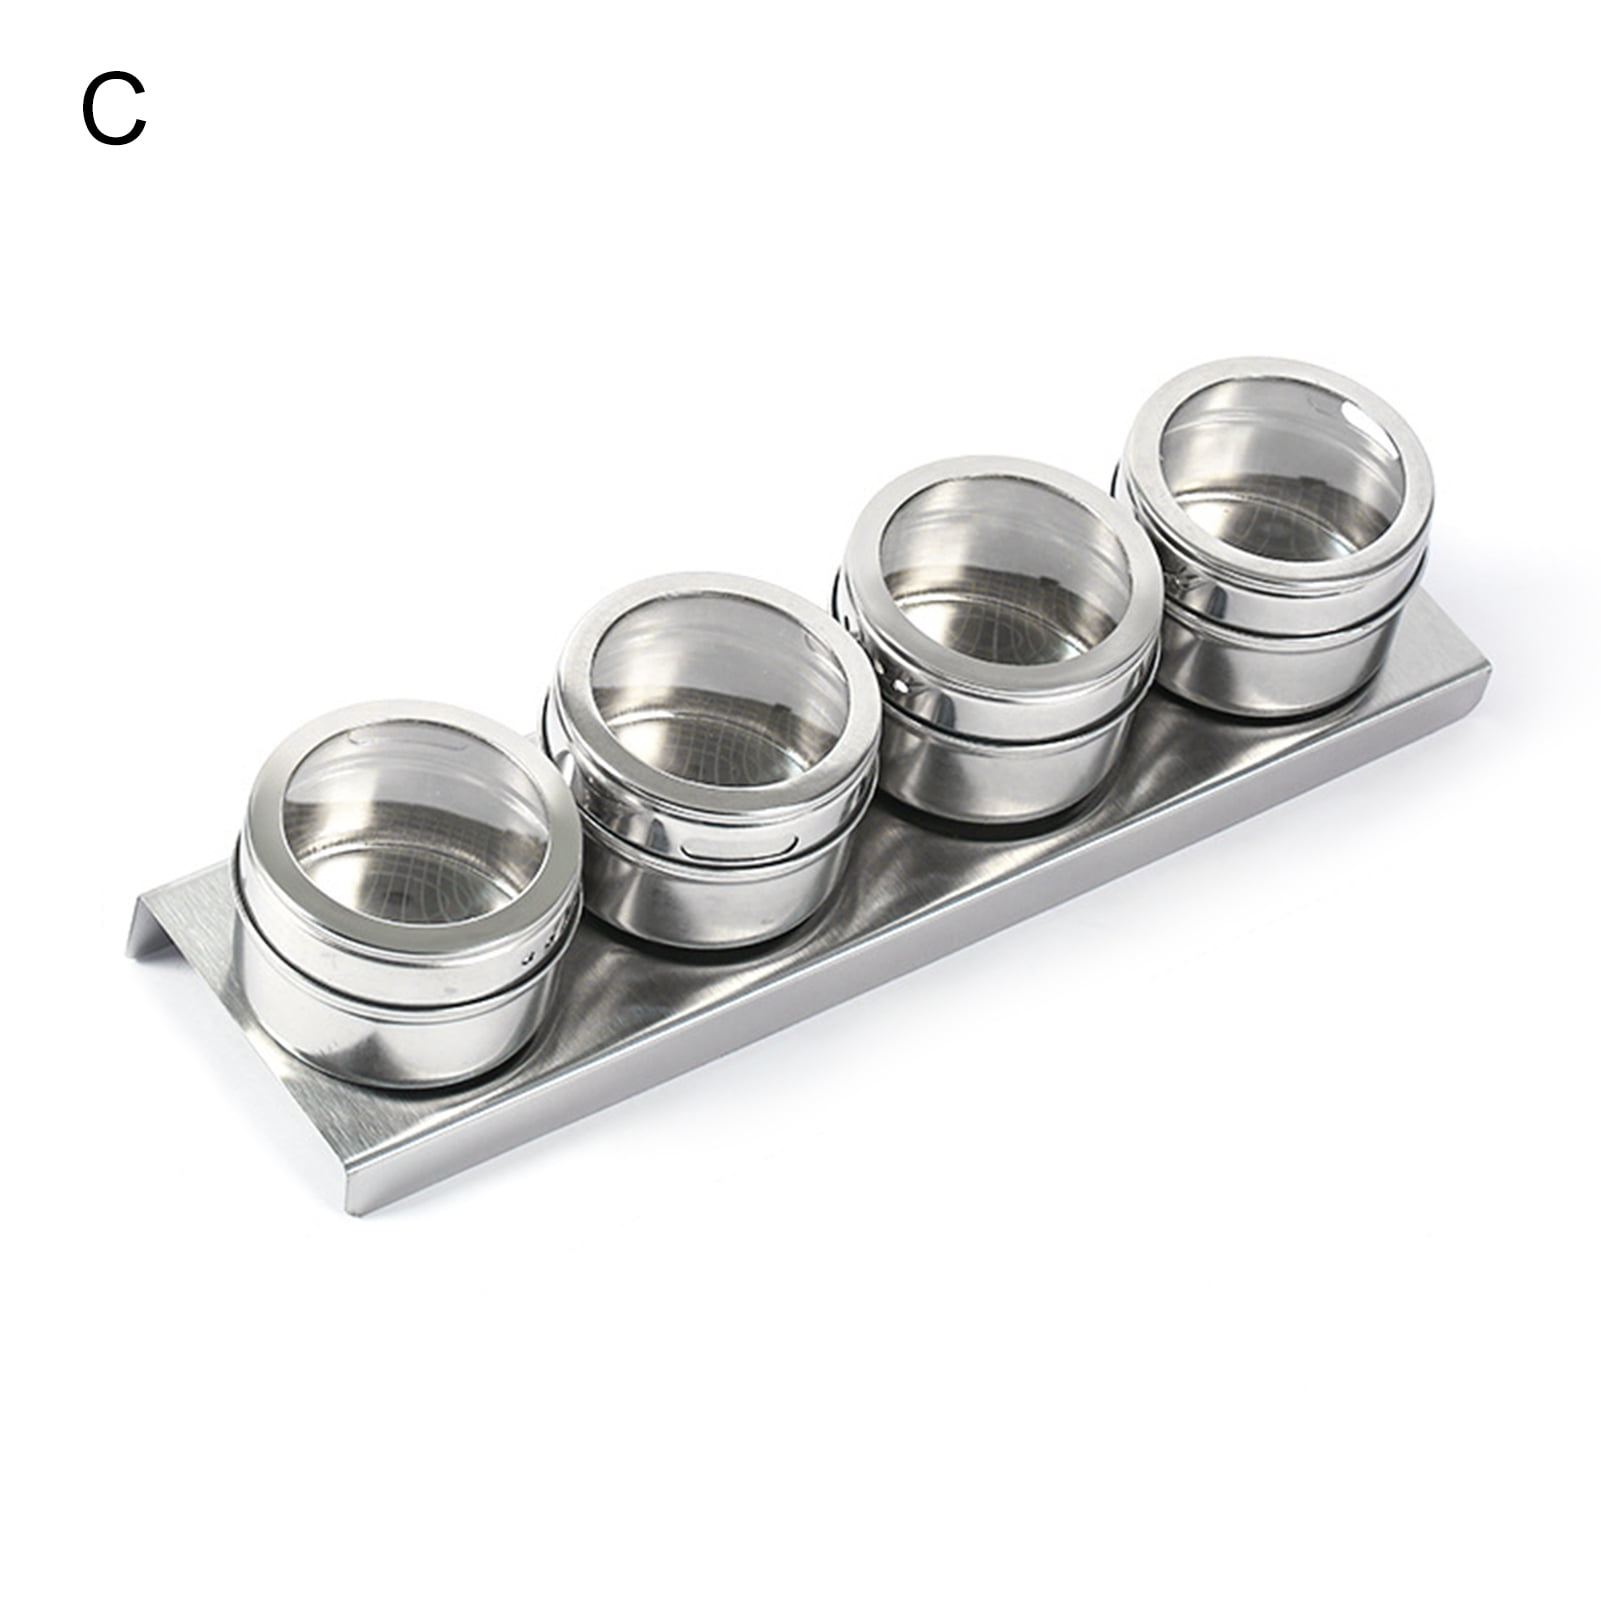 Xwq 1 Set Eco-Friendly Spice Jar Rust-proof Stainless Steel Magnetic Spice Organizer Box for Home